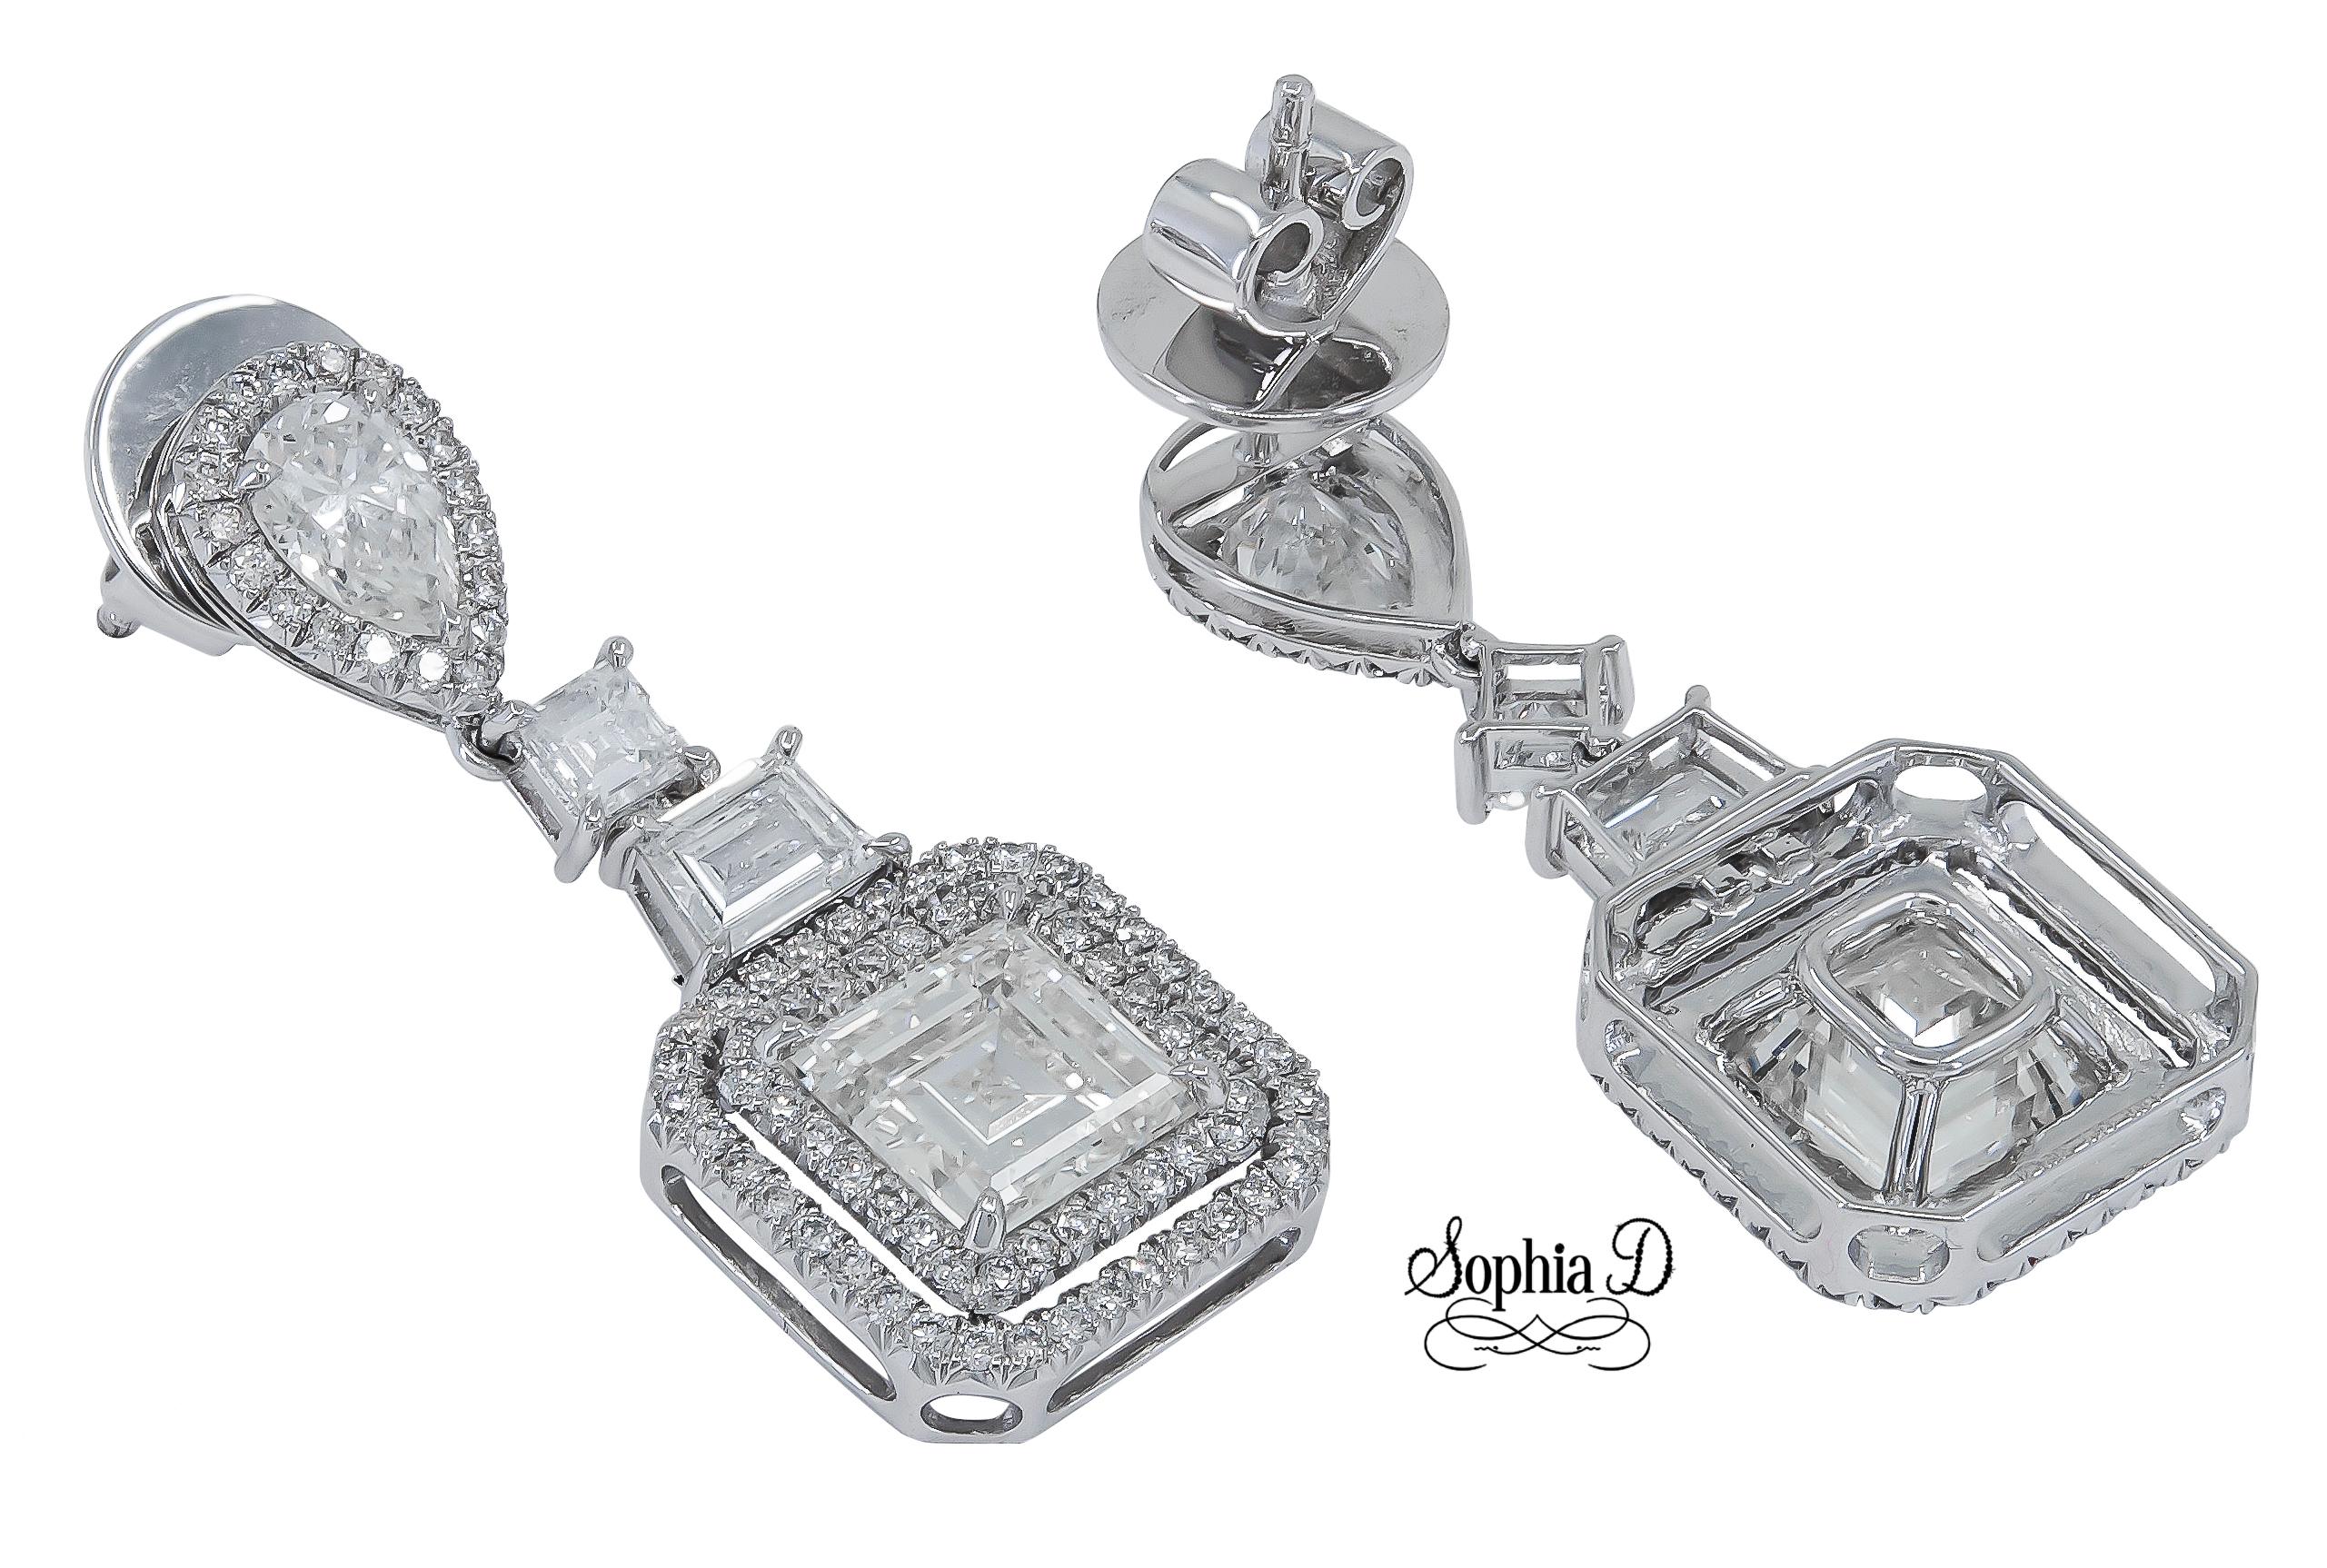 Gorgeous platinum square cut diamond earrings weighing 3.02 carats and surrounded by diamonds weighing a total of 2.12 carats.

Sophia D by Joseph Dardashti LTD has been known worldwide for 35 years and are inspired by classic Art Deco design that